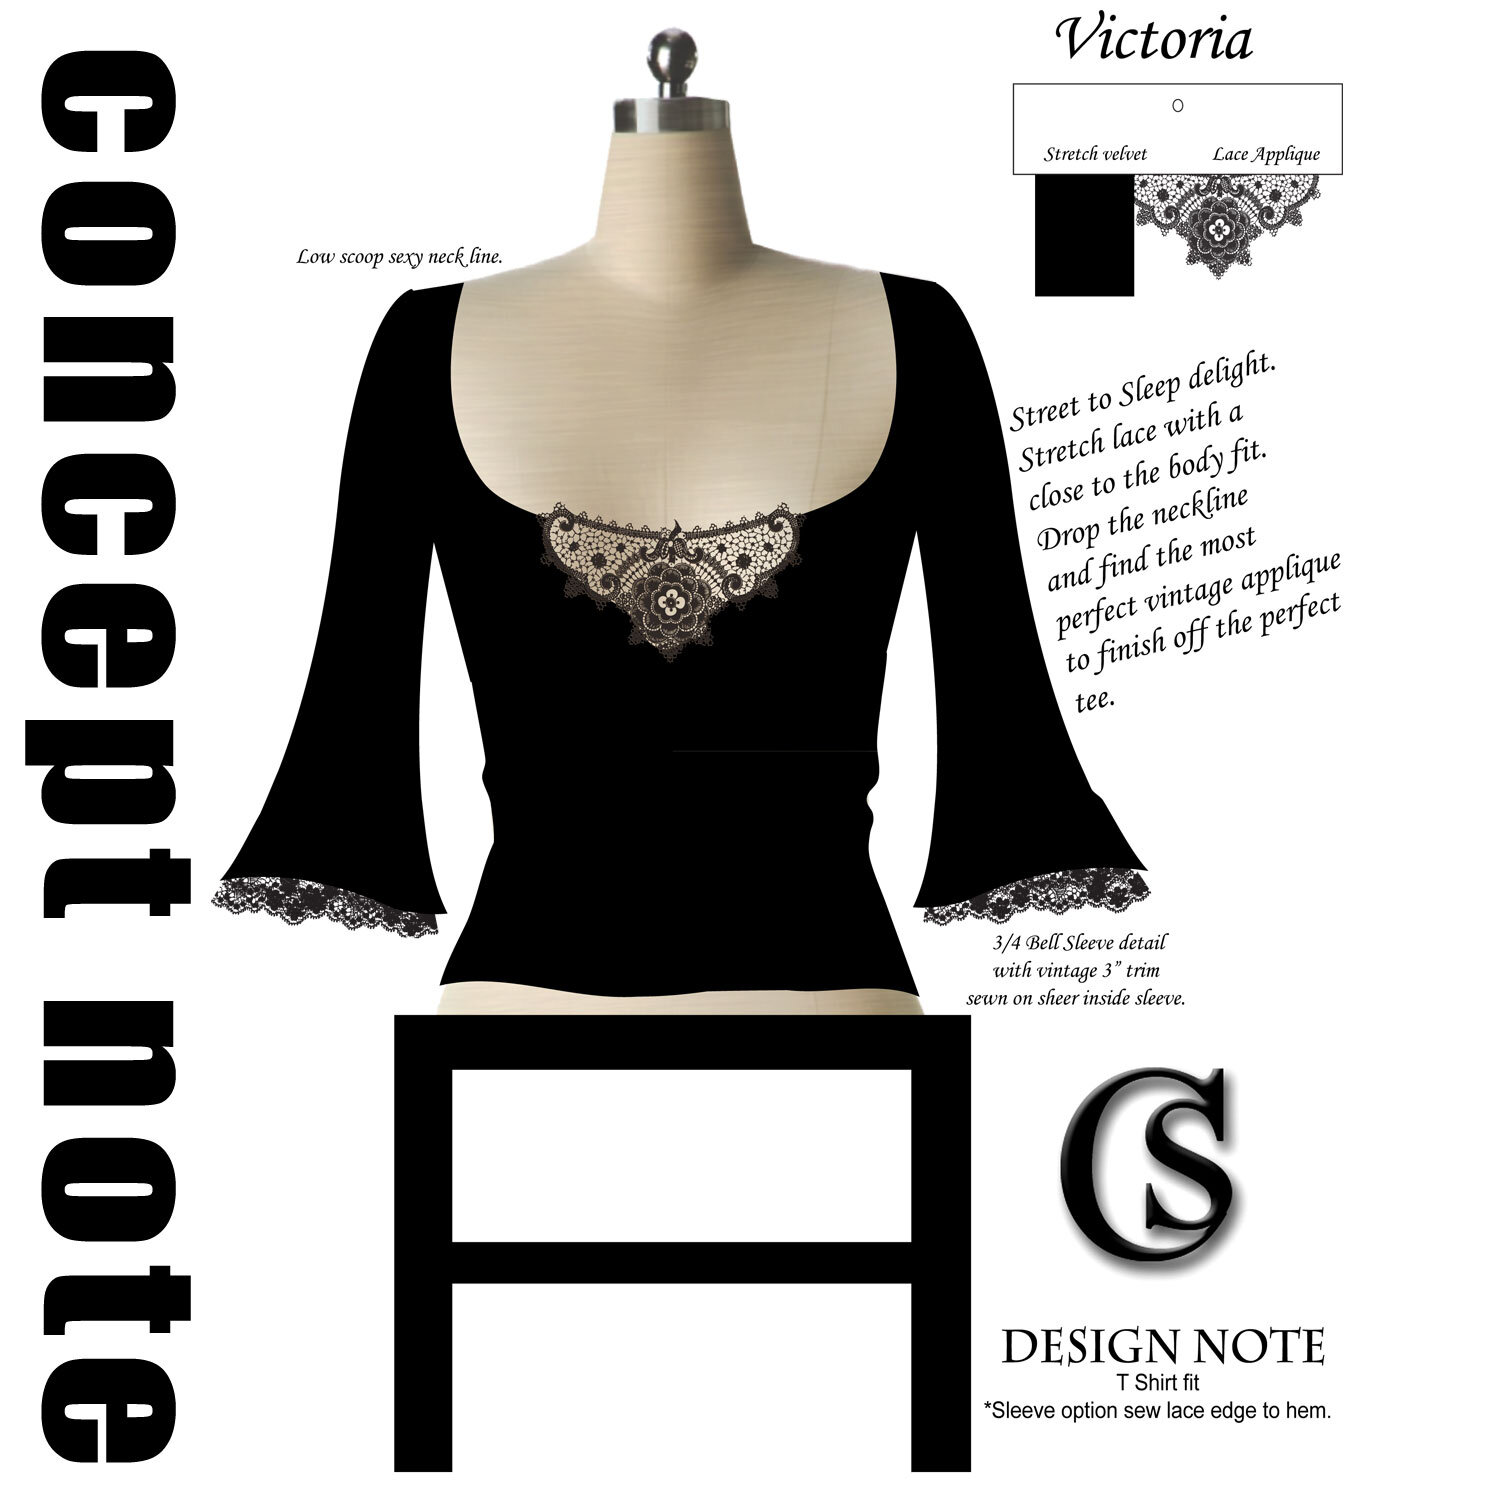 concept-notes-2021-chiaristylevictoria-tee-shirt-with-velvet.jpg